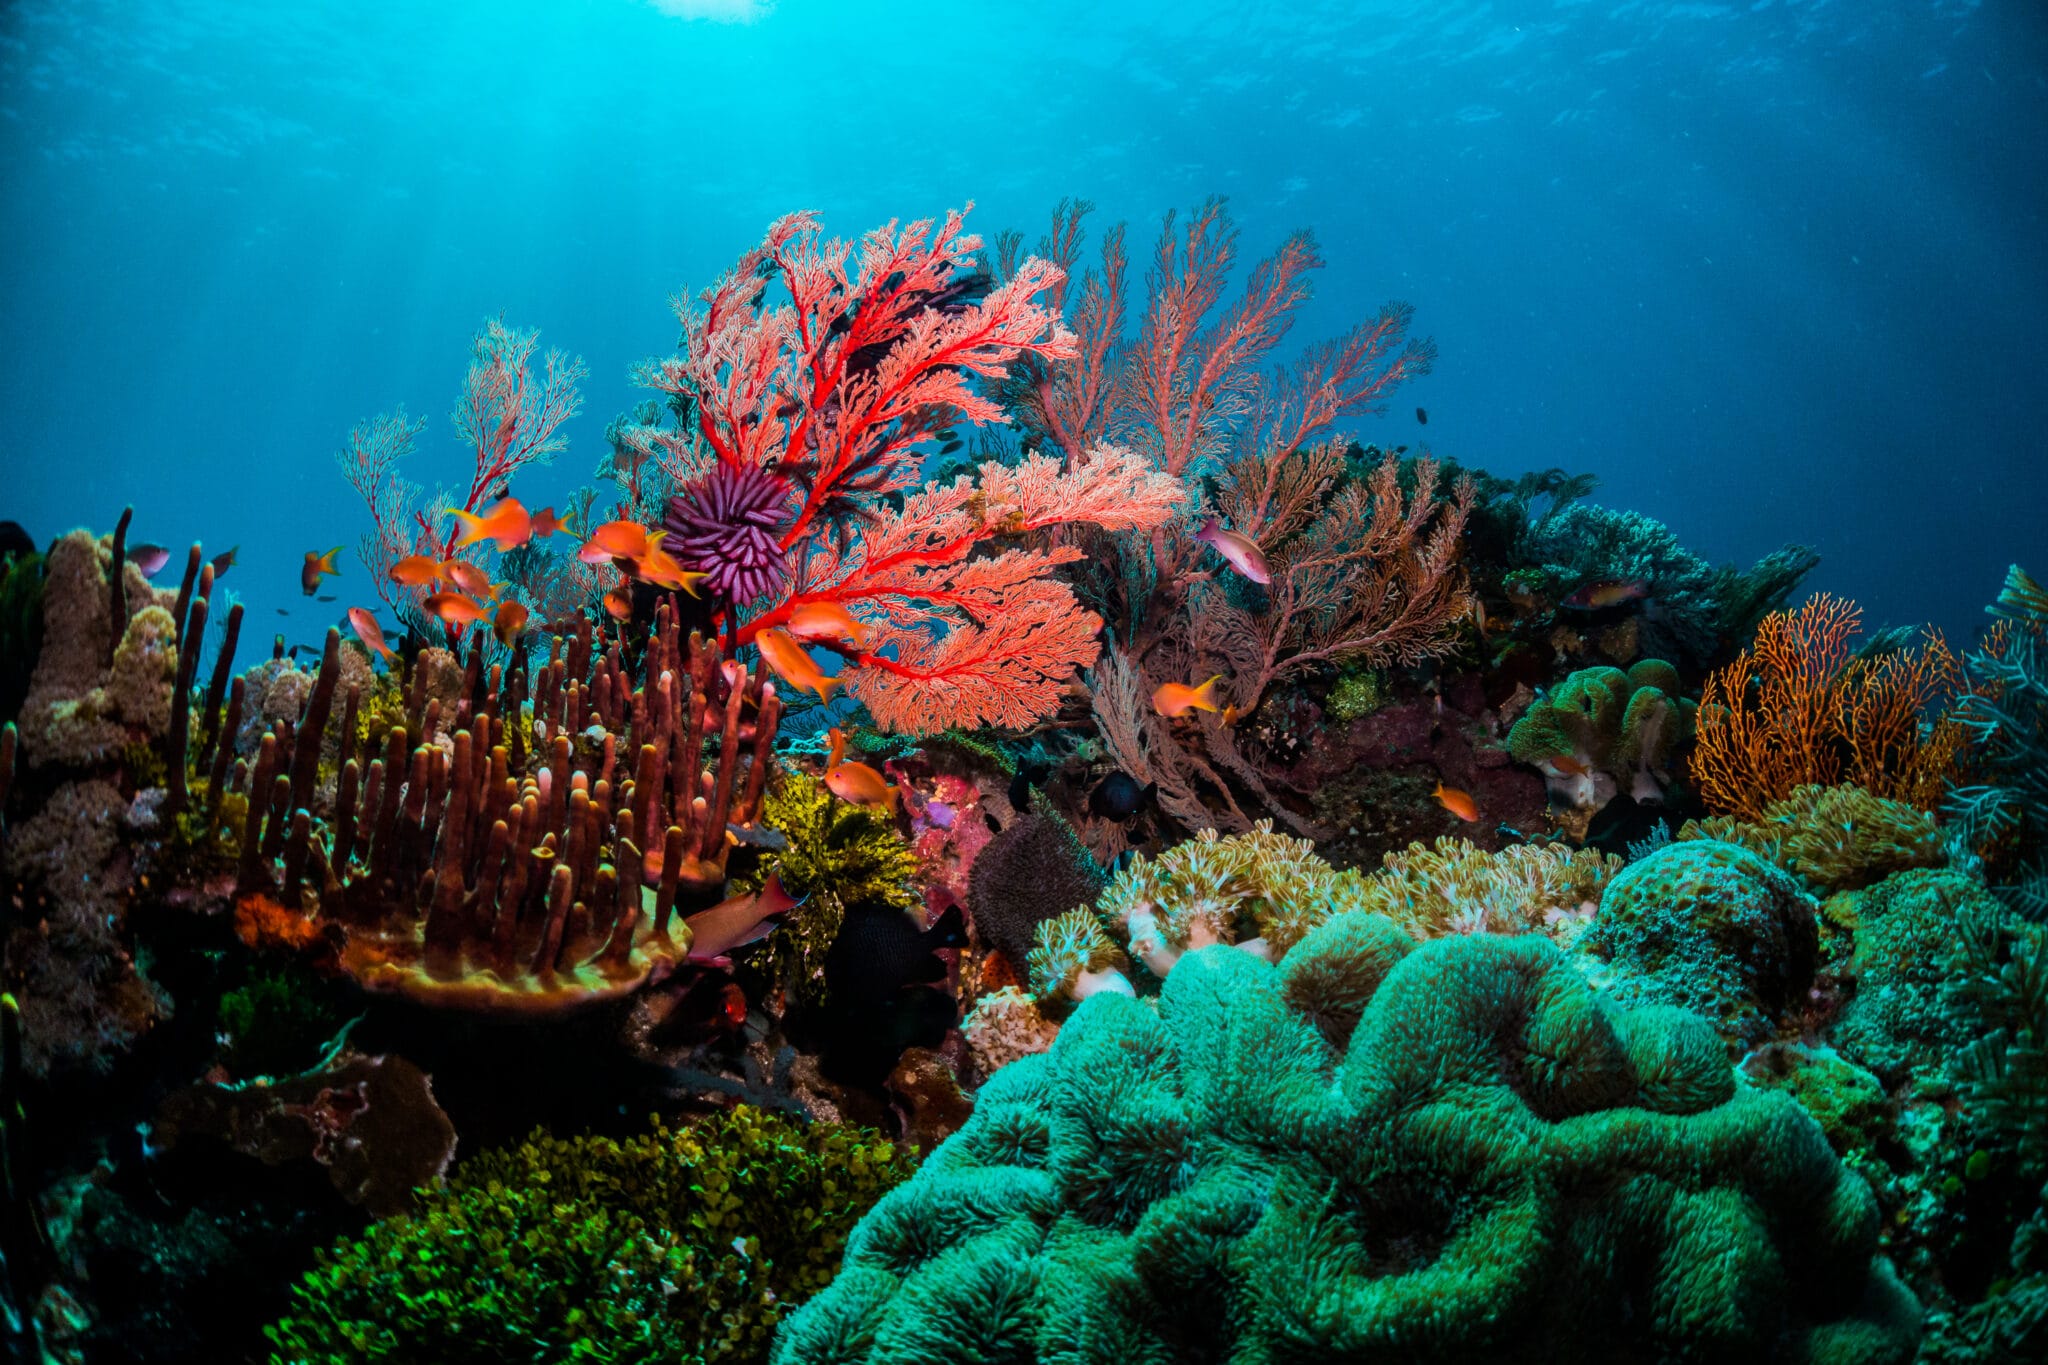 What Is The Average Temperature In The Coral Reef Biome